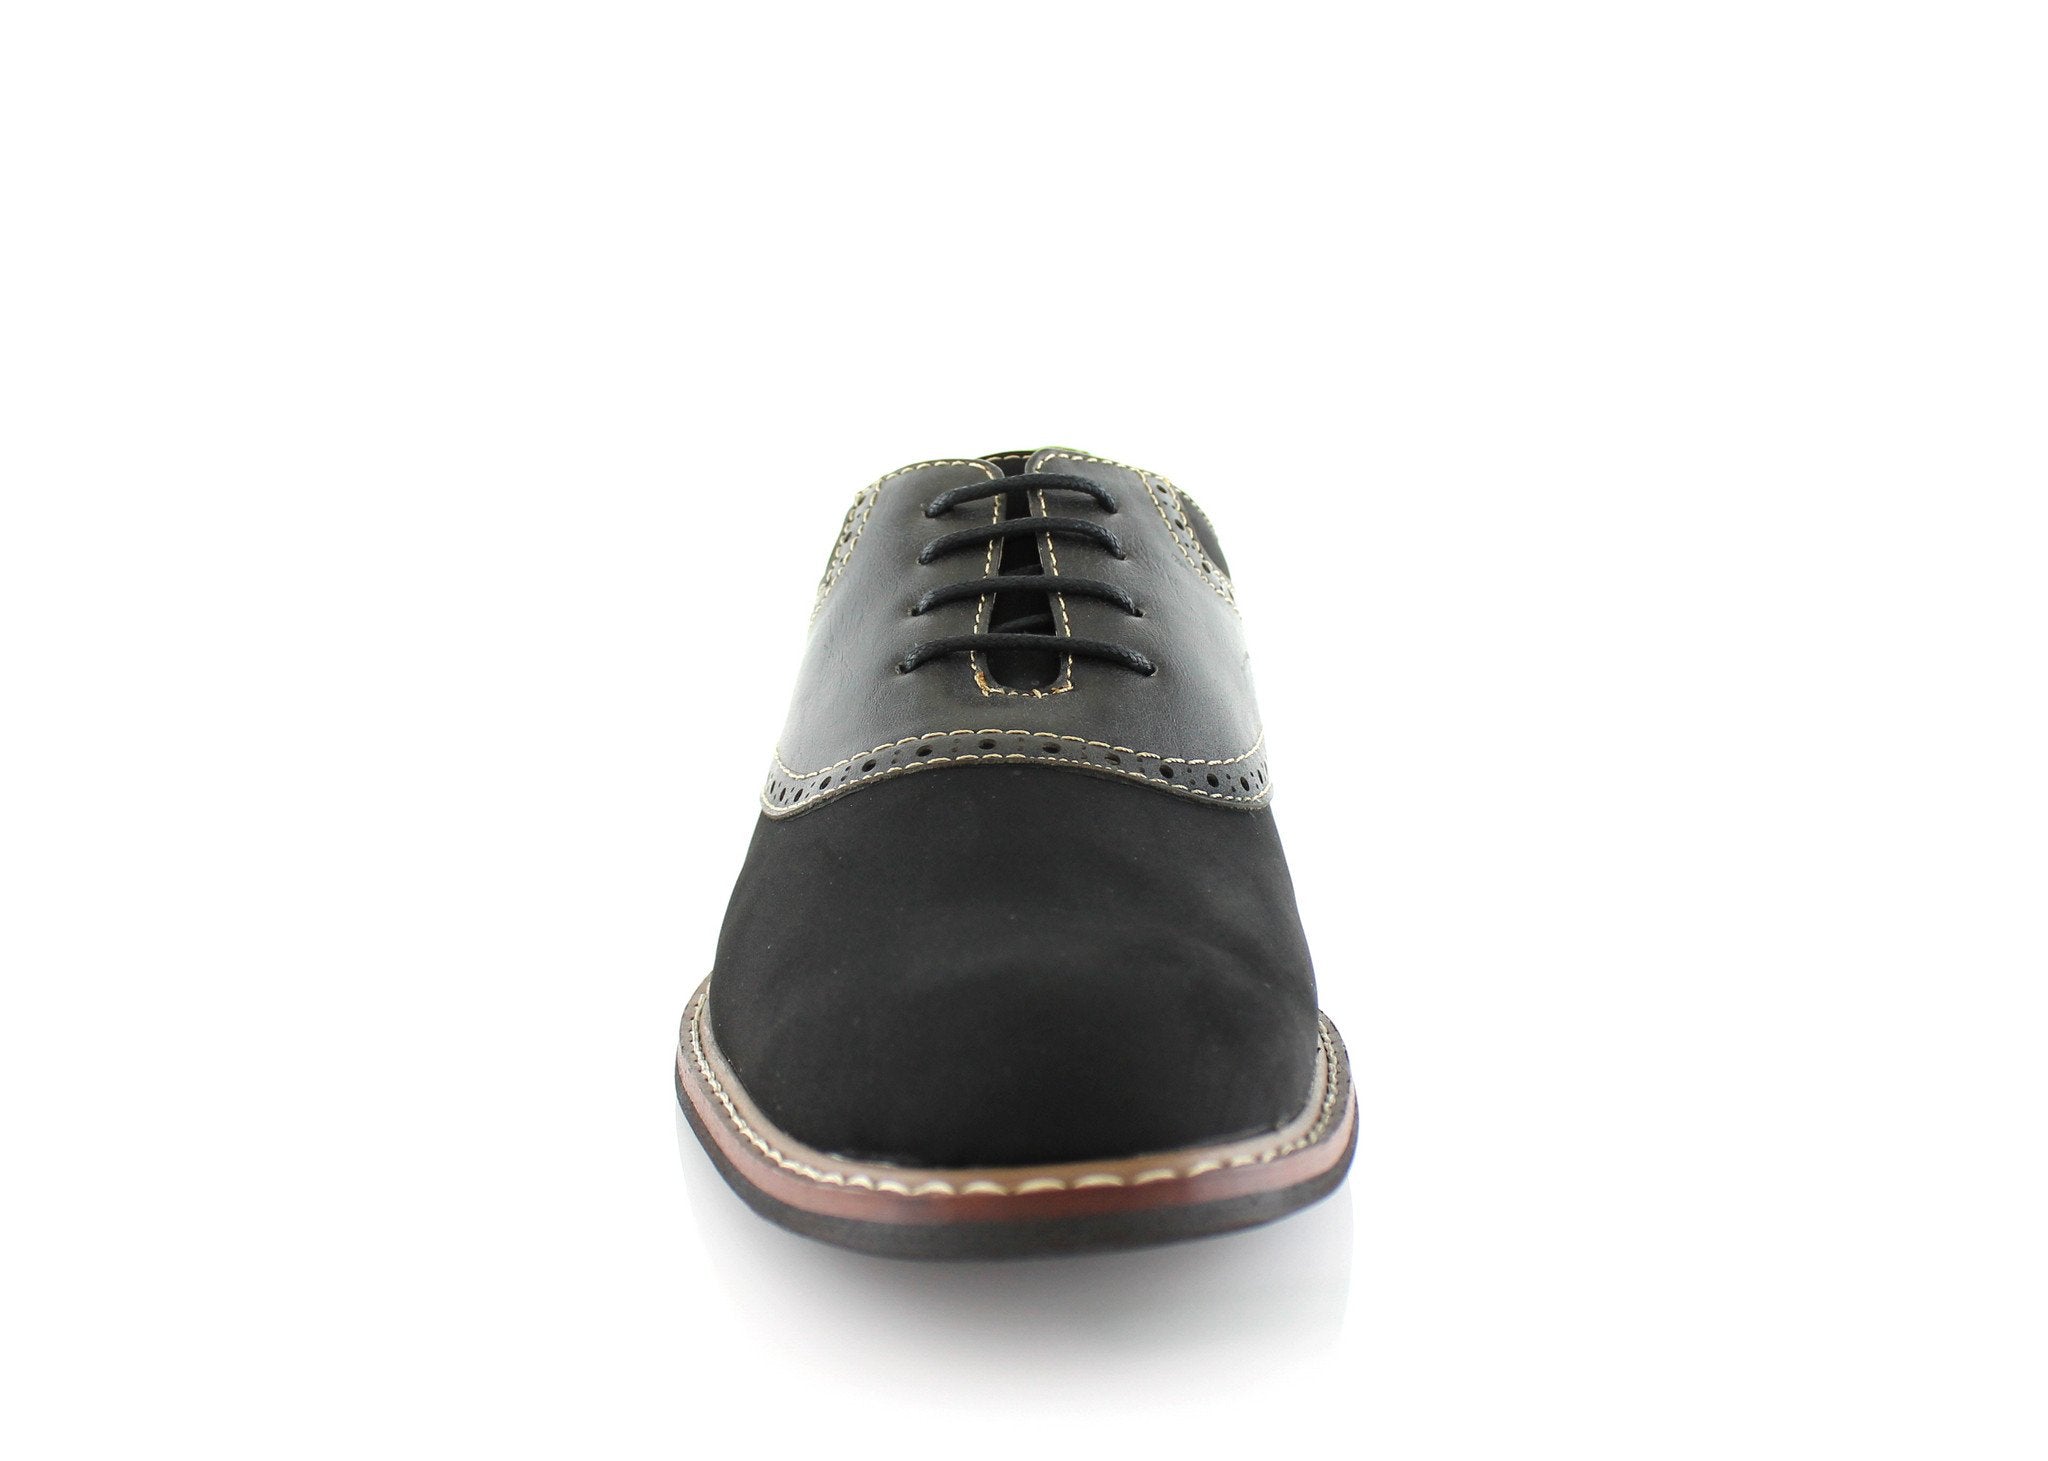 Two-Toned Perforated Oxfords | Jordan by Ferro Aldo | Conal Footwear | Front Angle View